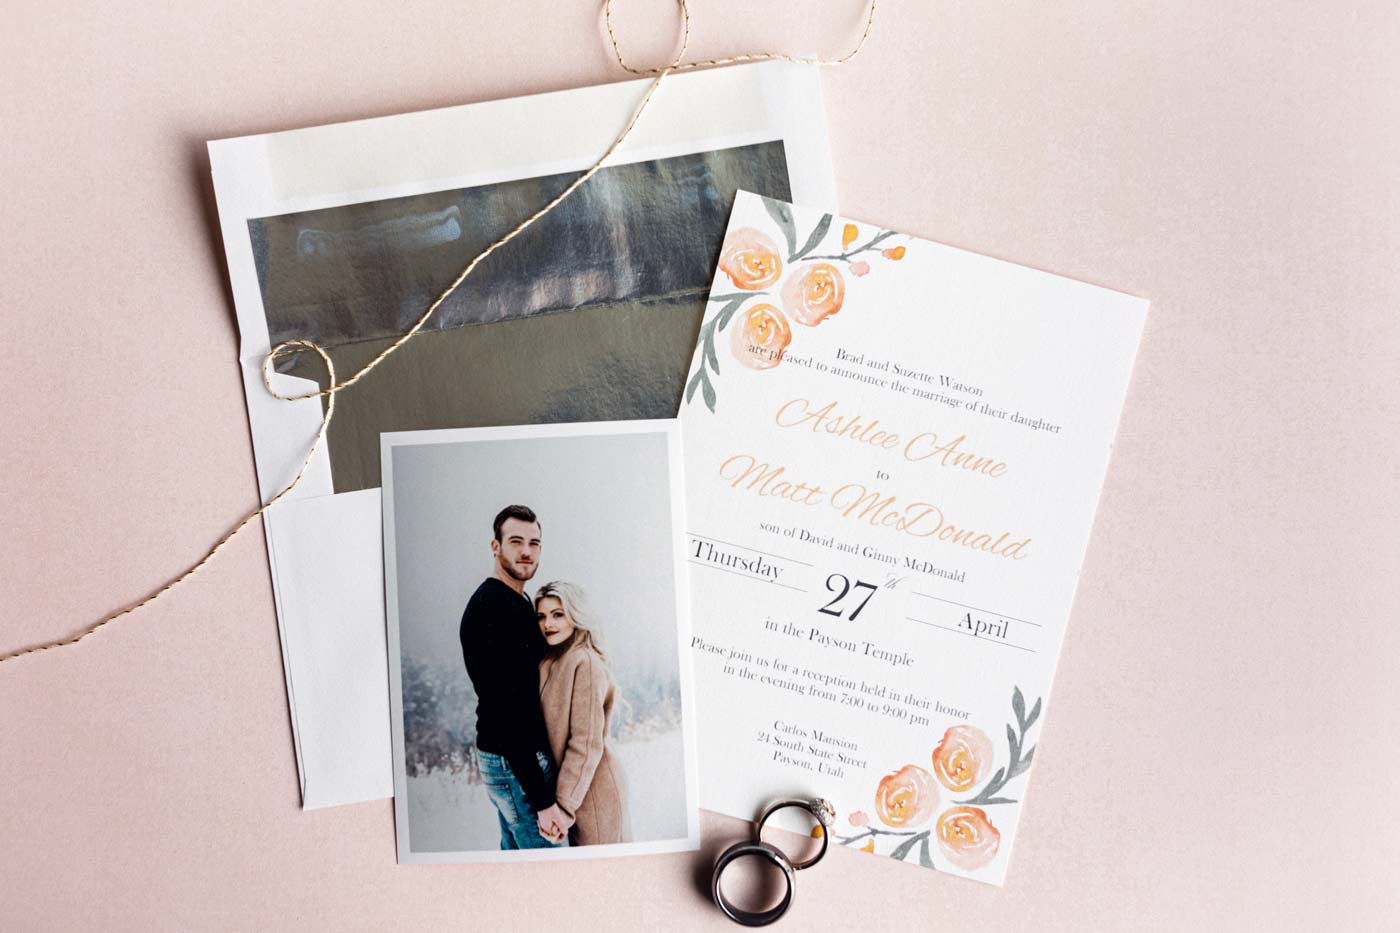 How to Design a Wedding Invitation - Free Software